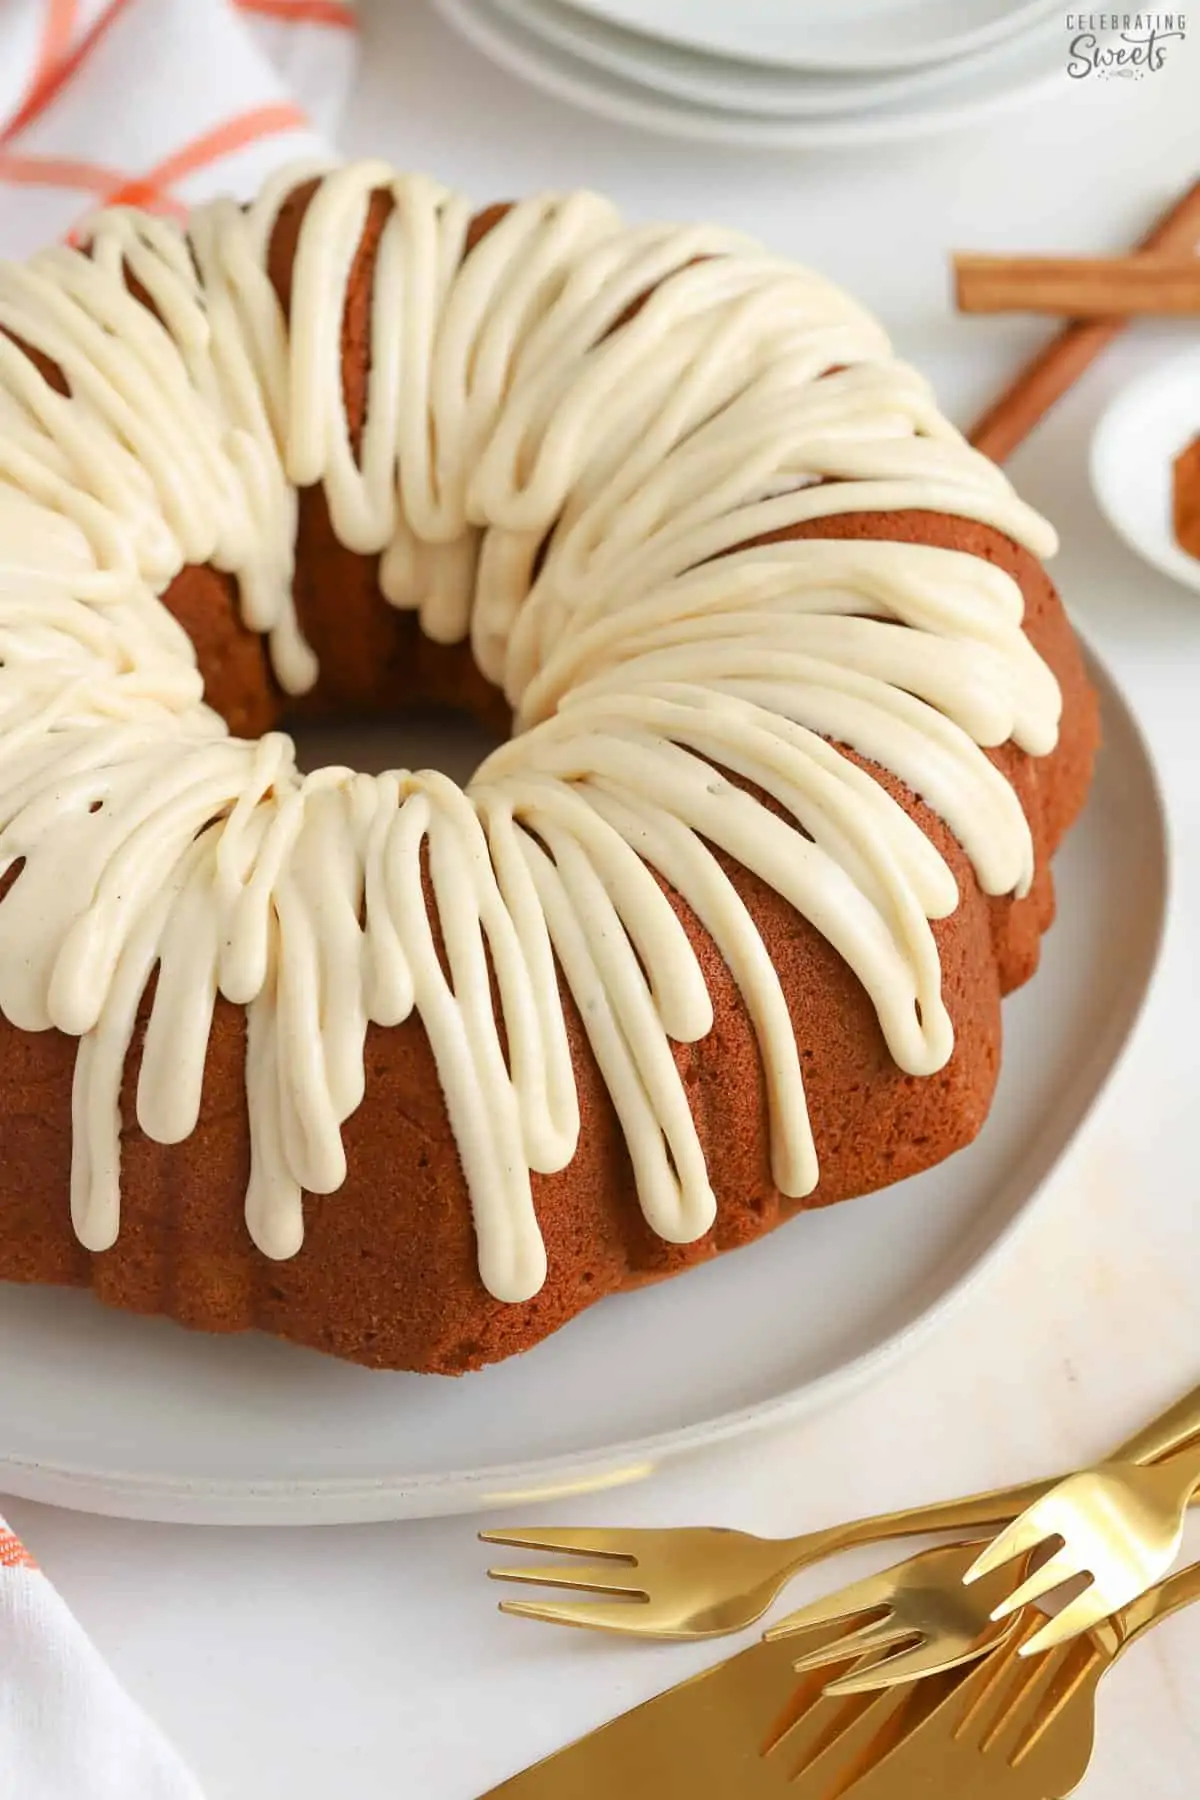 Pumpkin bundt cake drizzled with white icing sitting on a white plate next to gold forks.